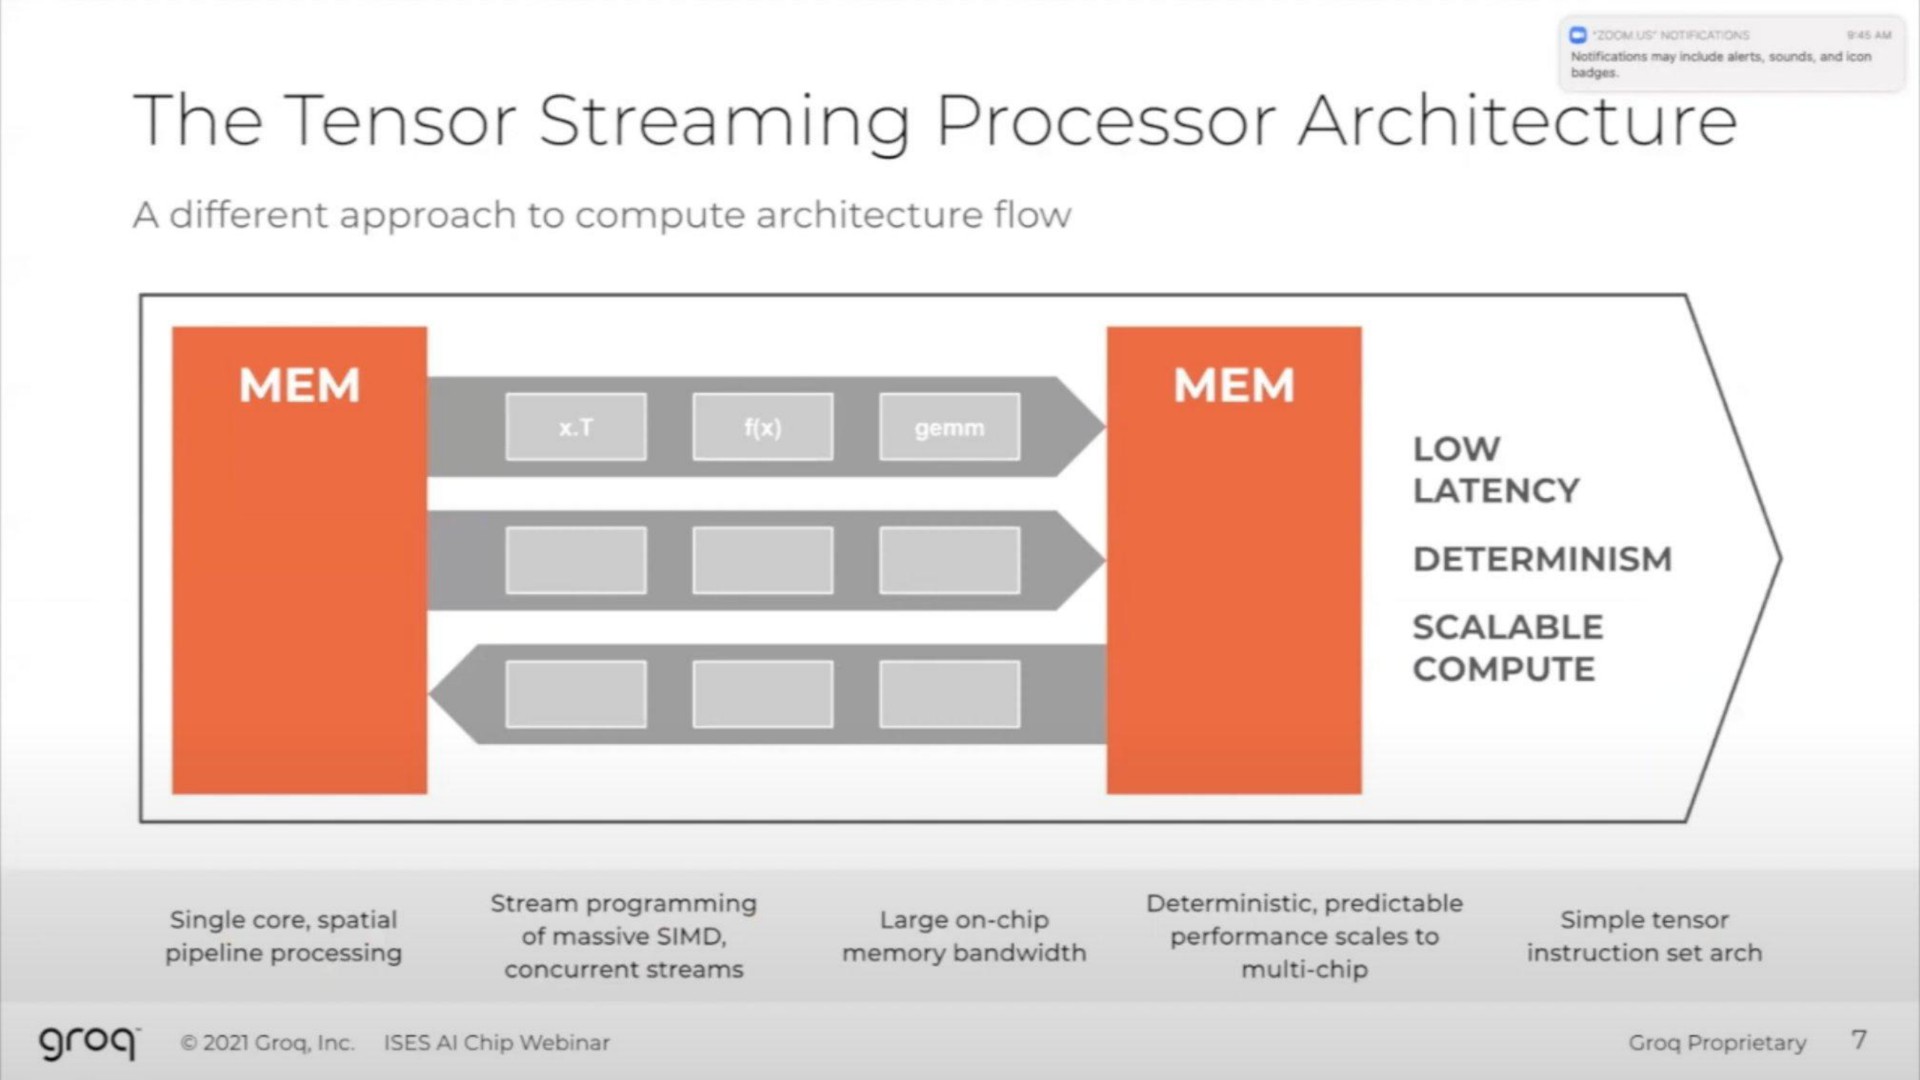 the tensor streaming processor architecture a different approach to compute architecture flow low latency determinism scalable compute | Groq